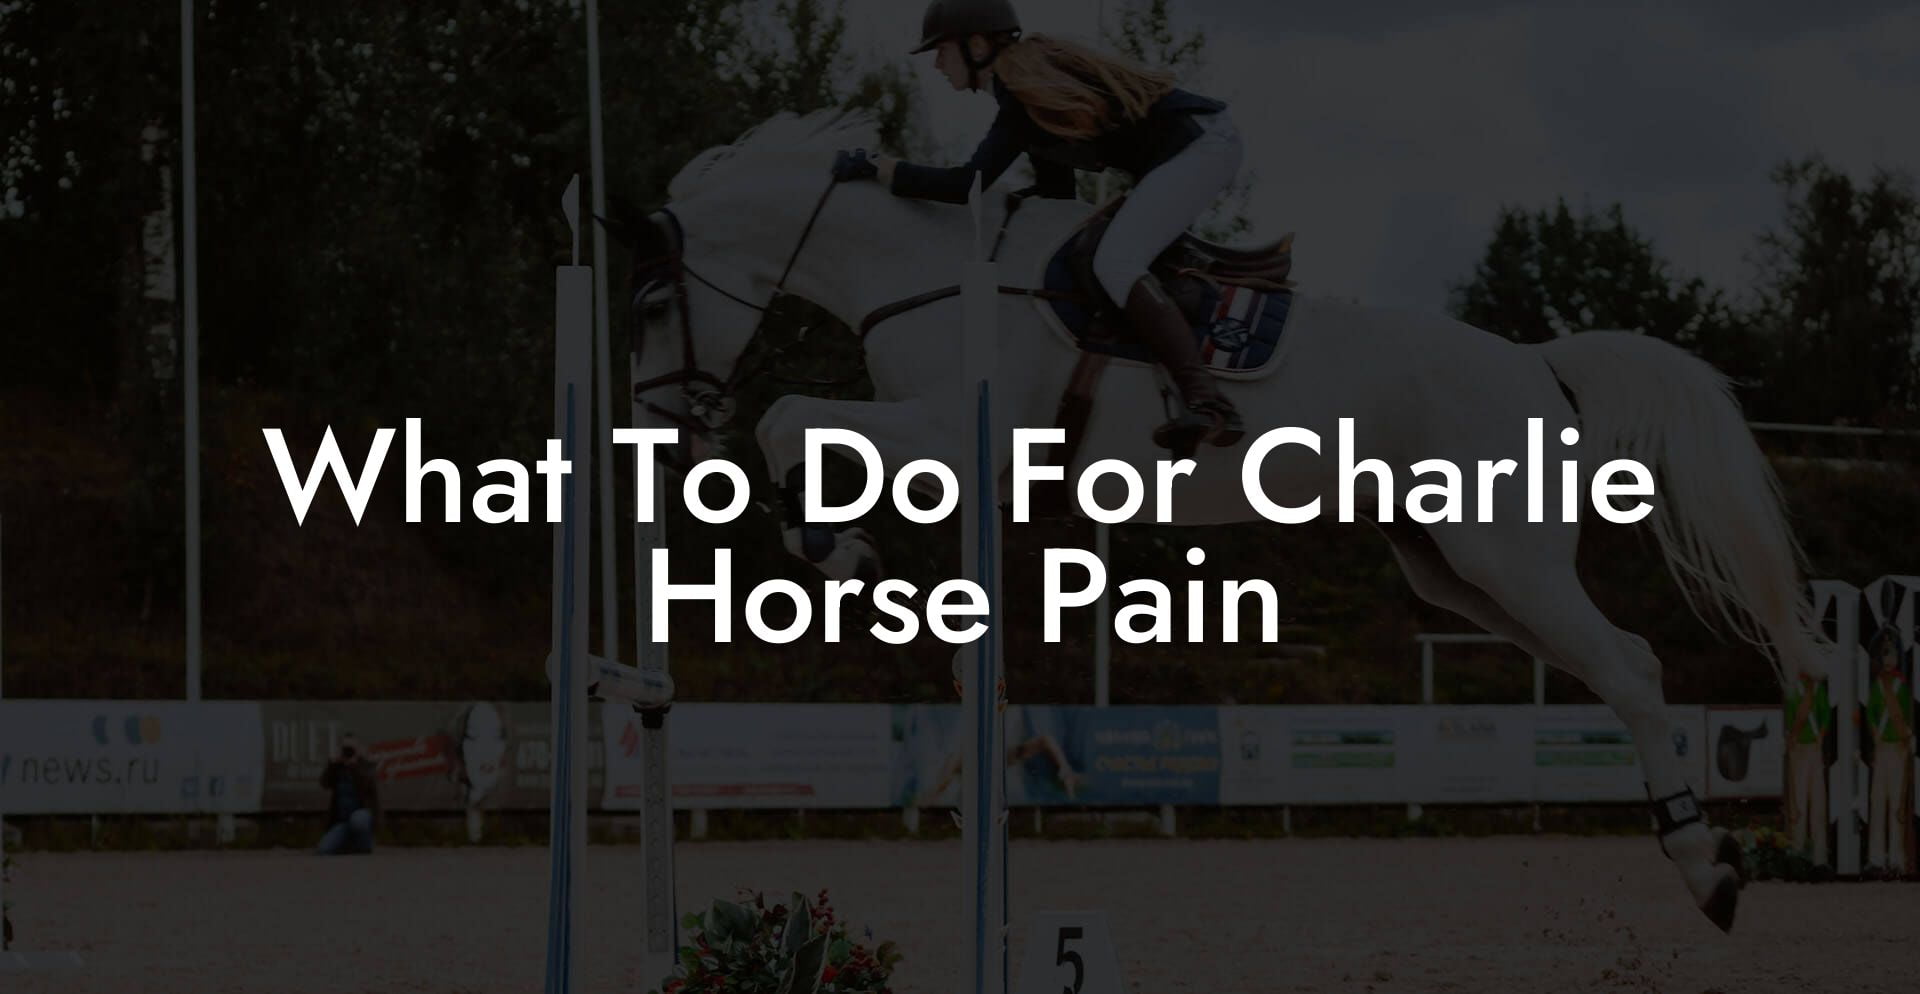 What To Do For Charlie Horse Pain